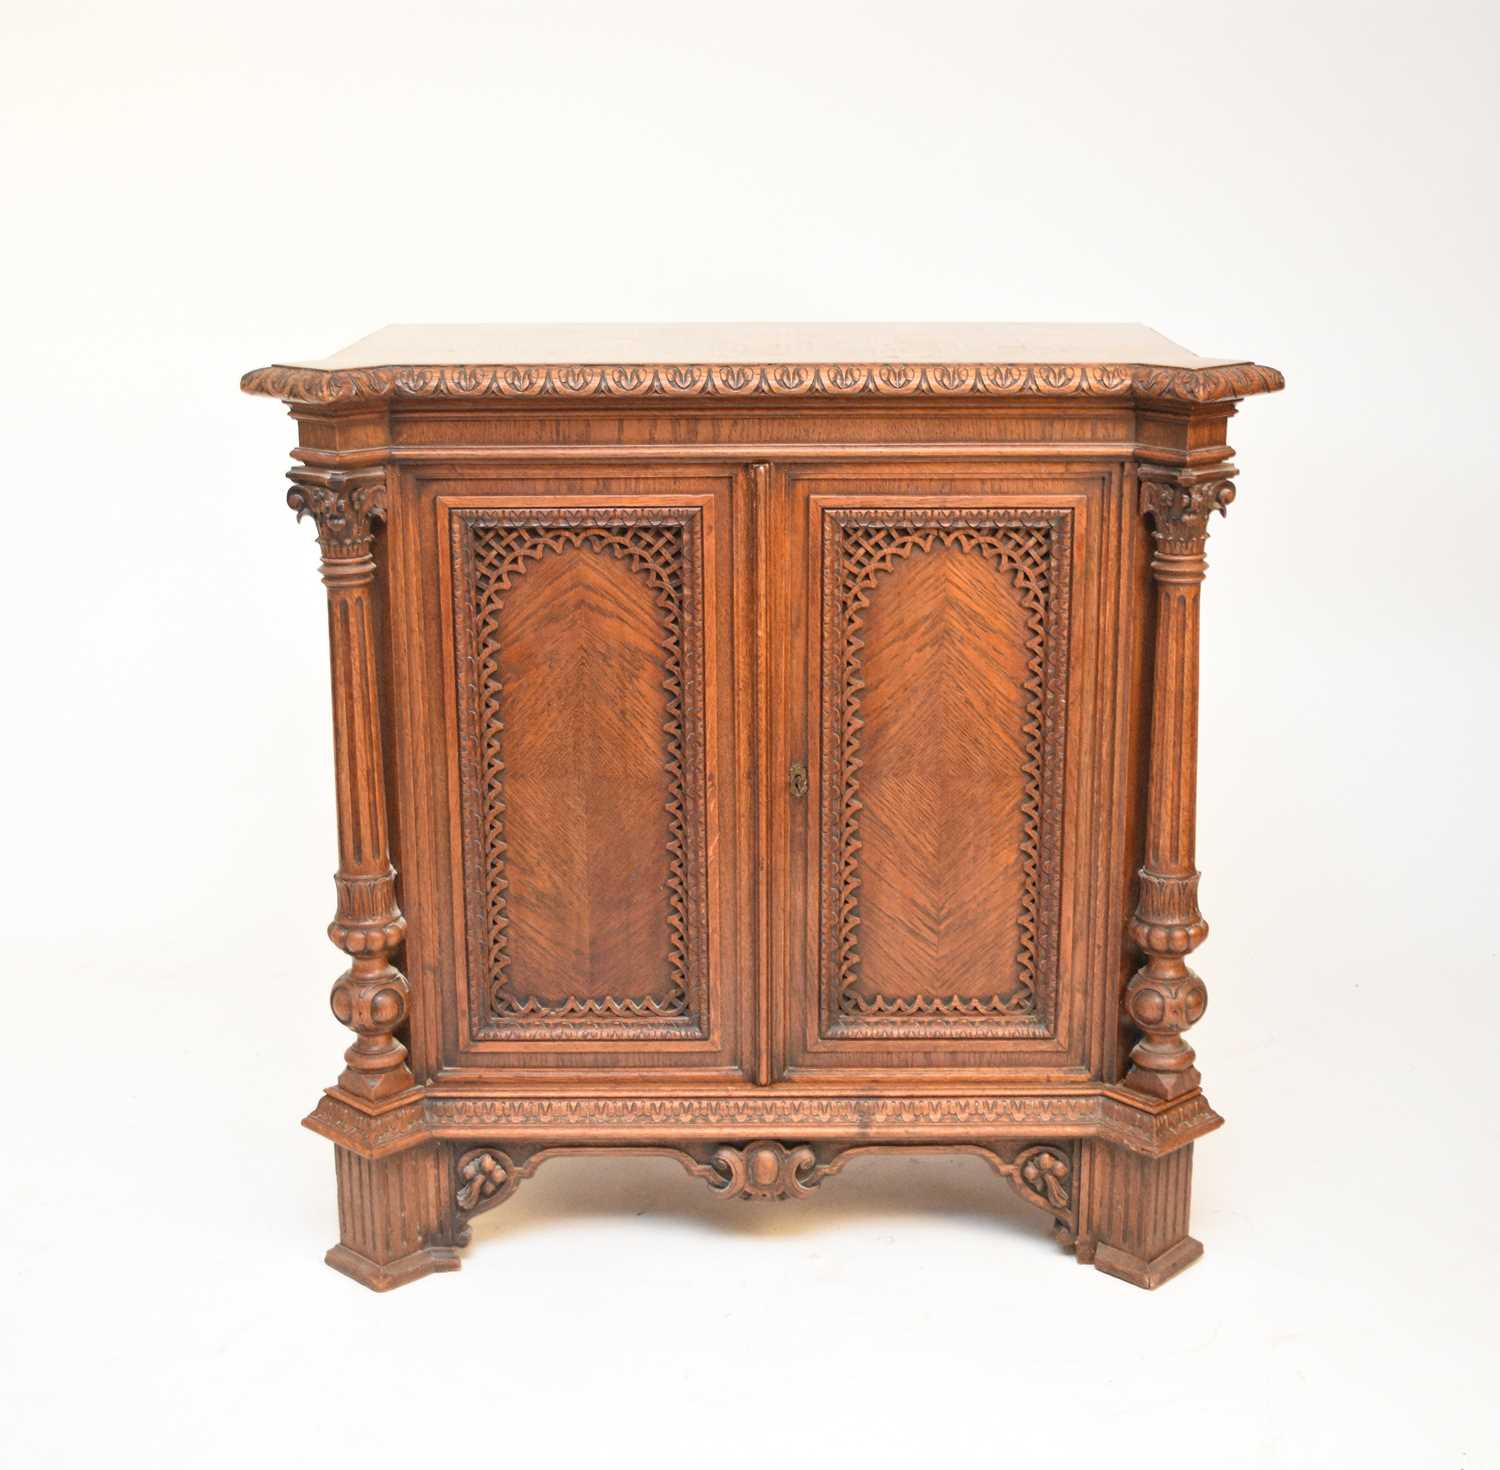 A good 19th century parquetry and carved oak cabinet, probably French